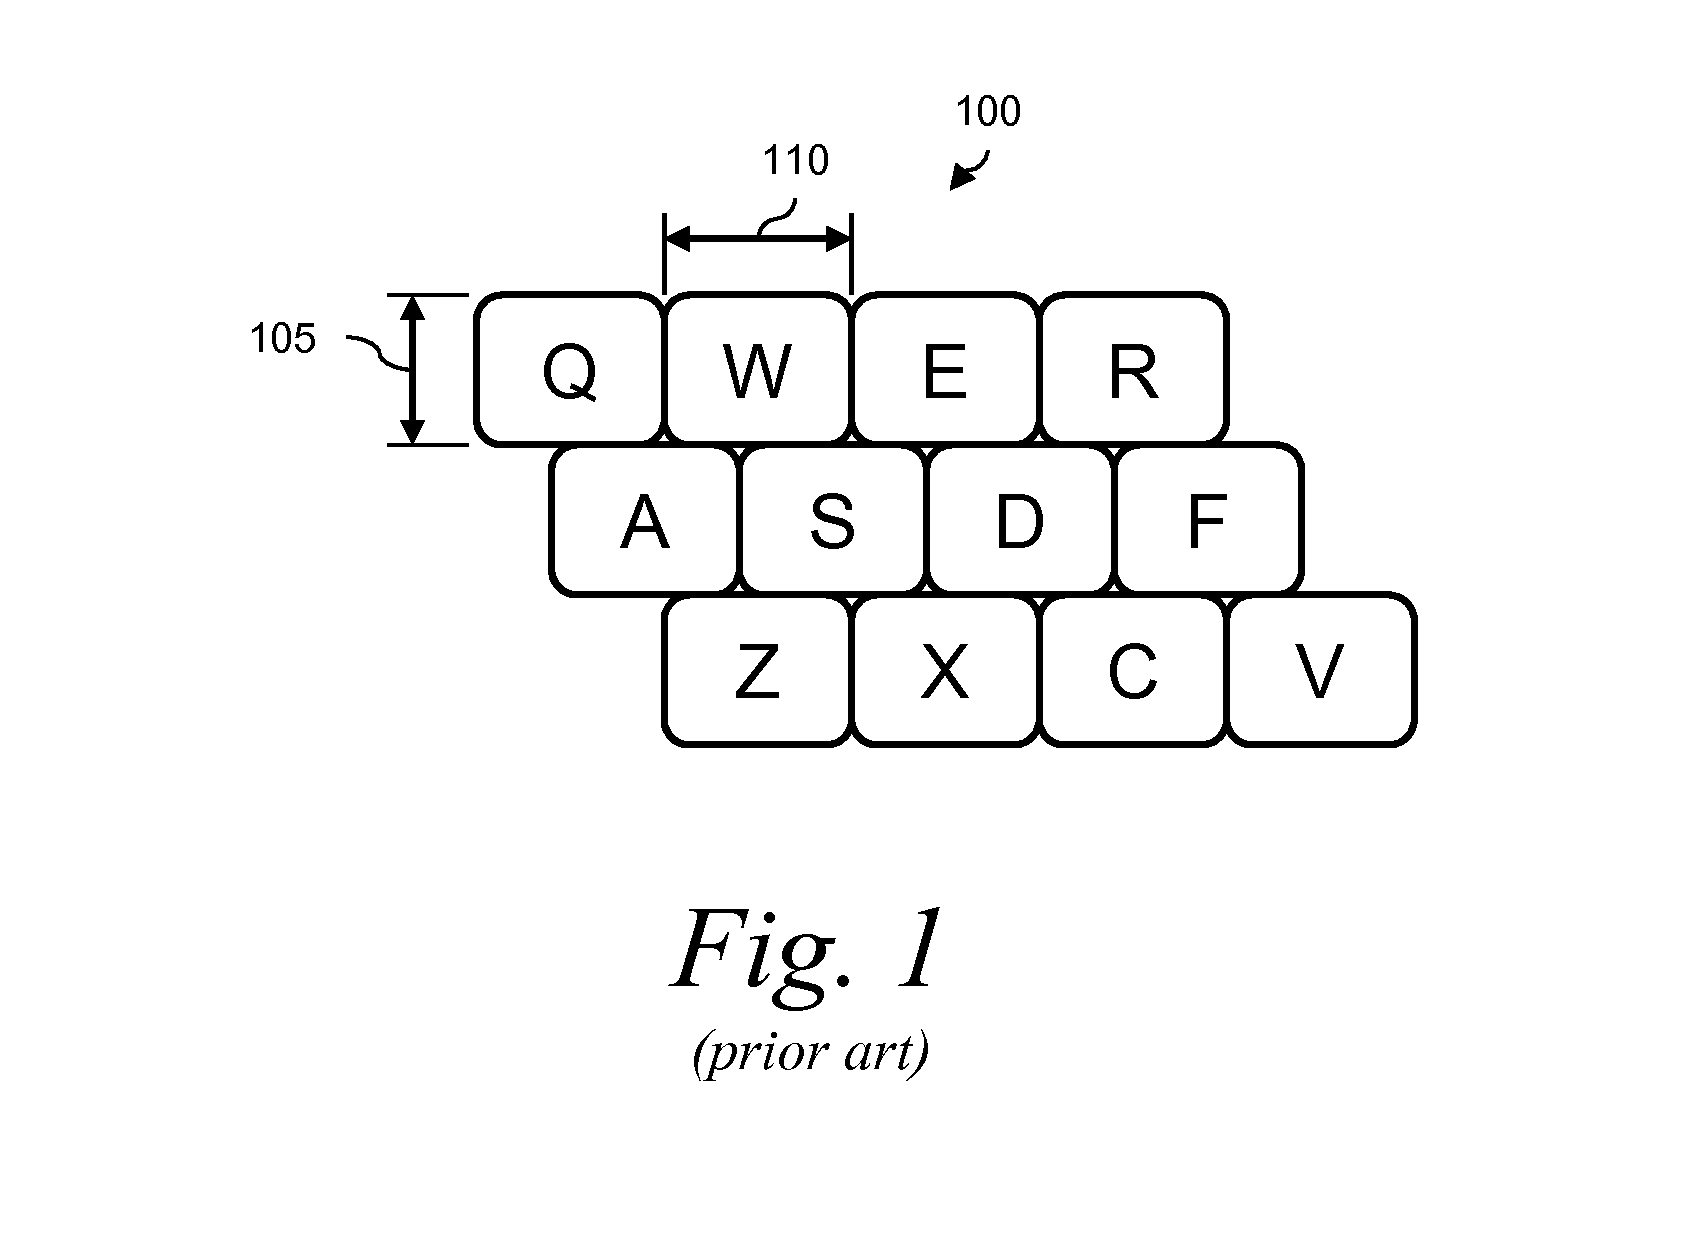 Method and Apparatus for Securing Input of Information via Software Keyboards